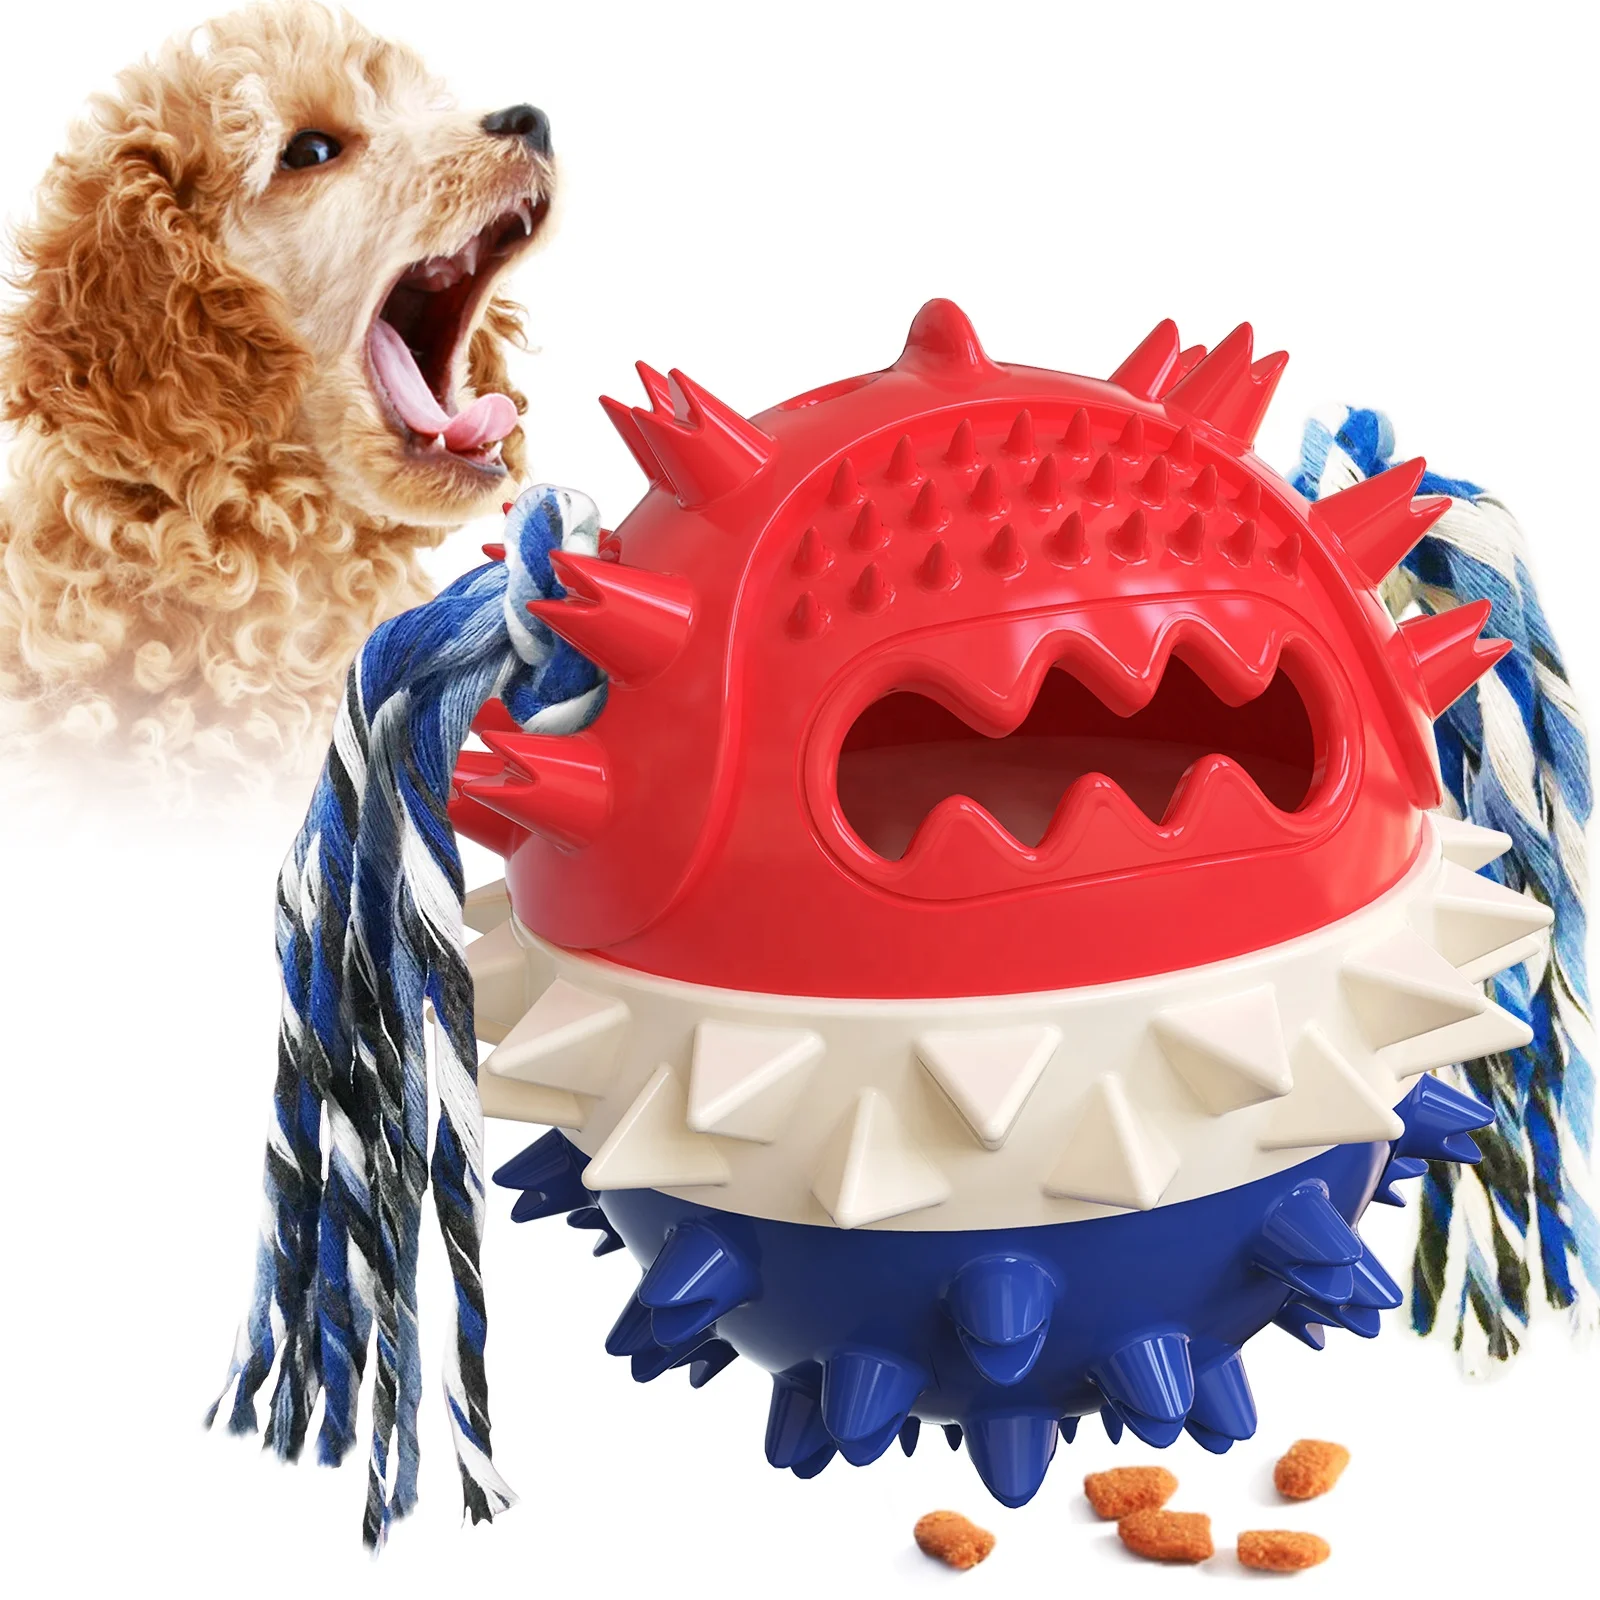 

New Products Amazon Explosive Type Water Floating Dog bath Toy Pet Chew Toy Squeaking Leaking Dispensing Ball, Yellow,blue,red